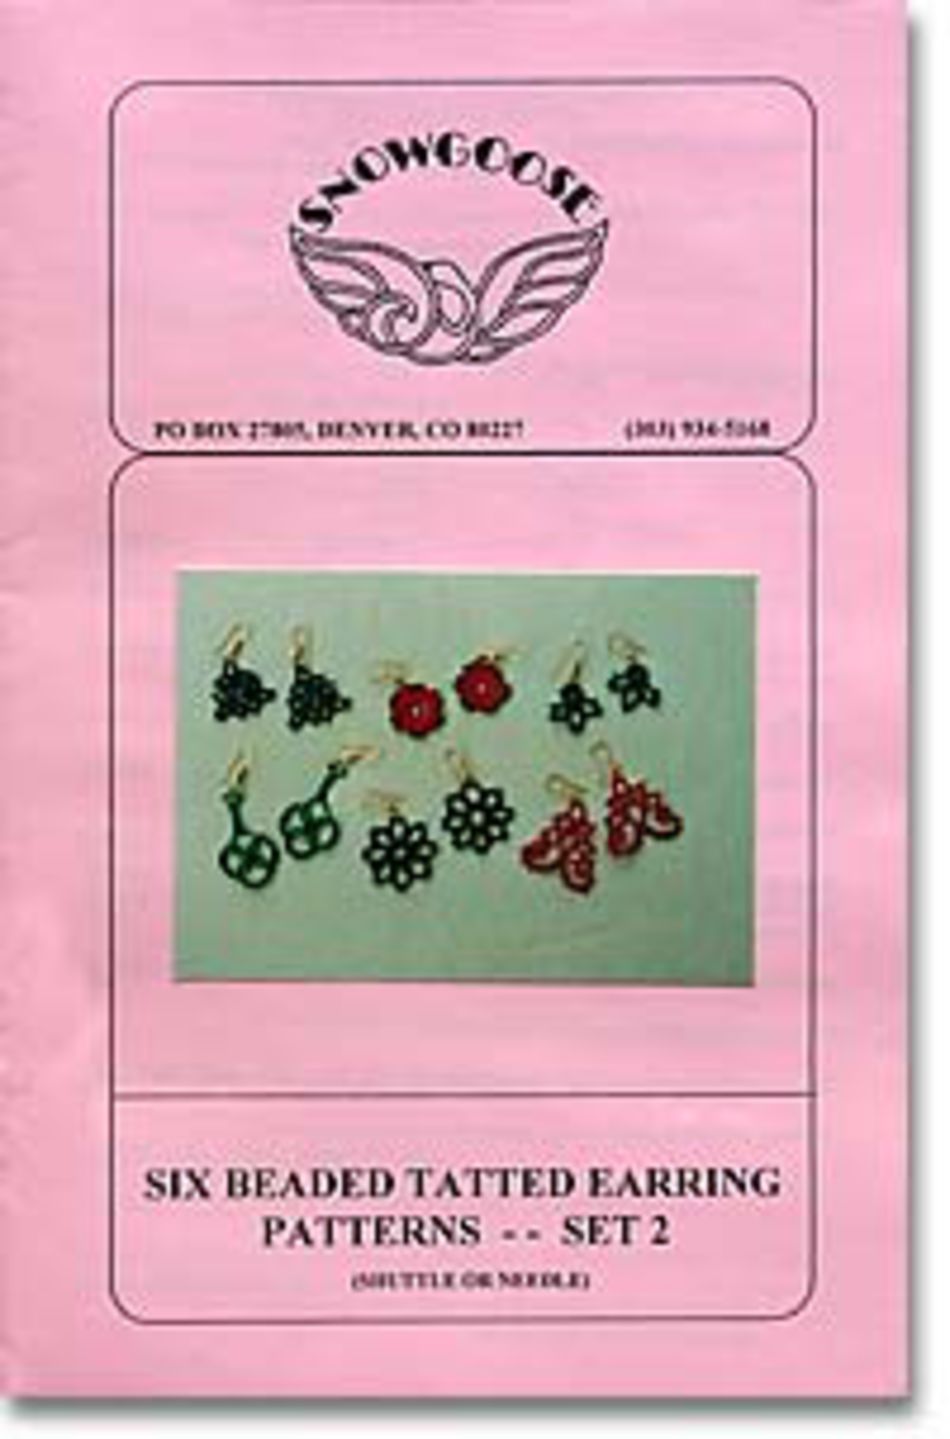 Bobbin Lace and Tatting Patterns Beaded Tatted Earrings Set 2